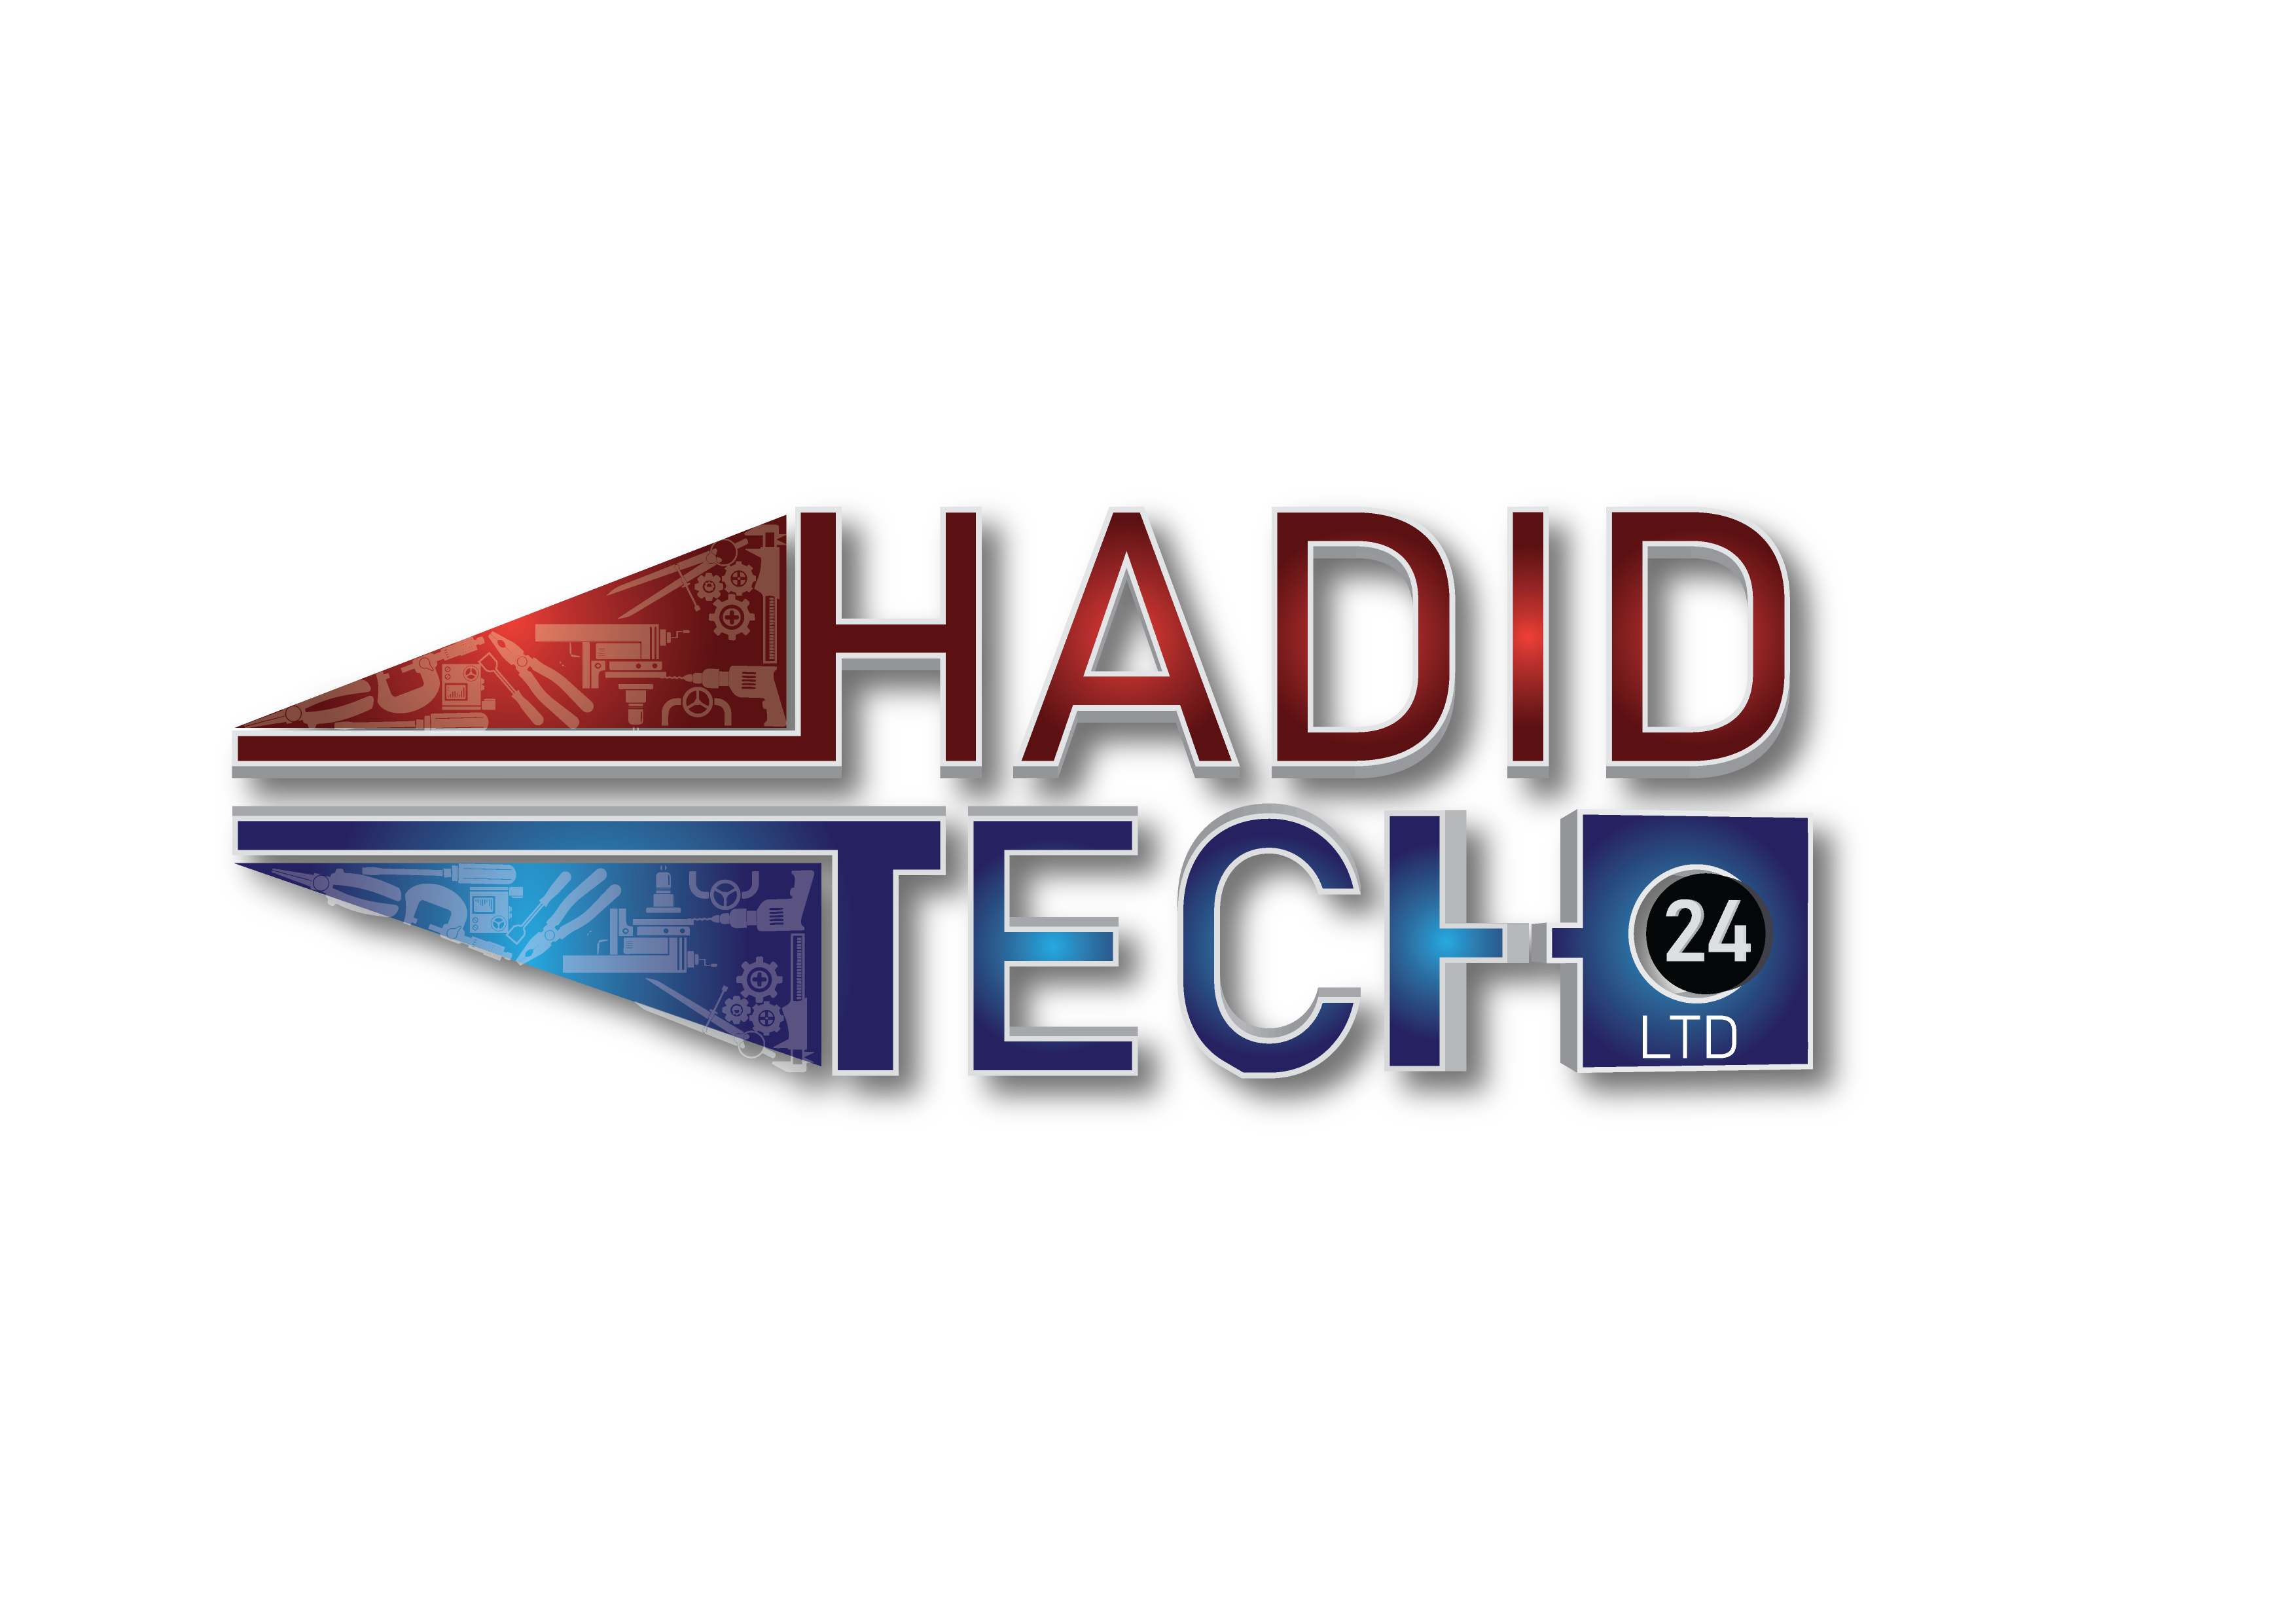 HADIDTECH24 LIMITED